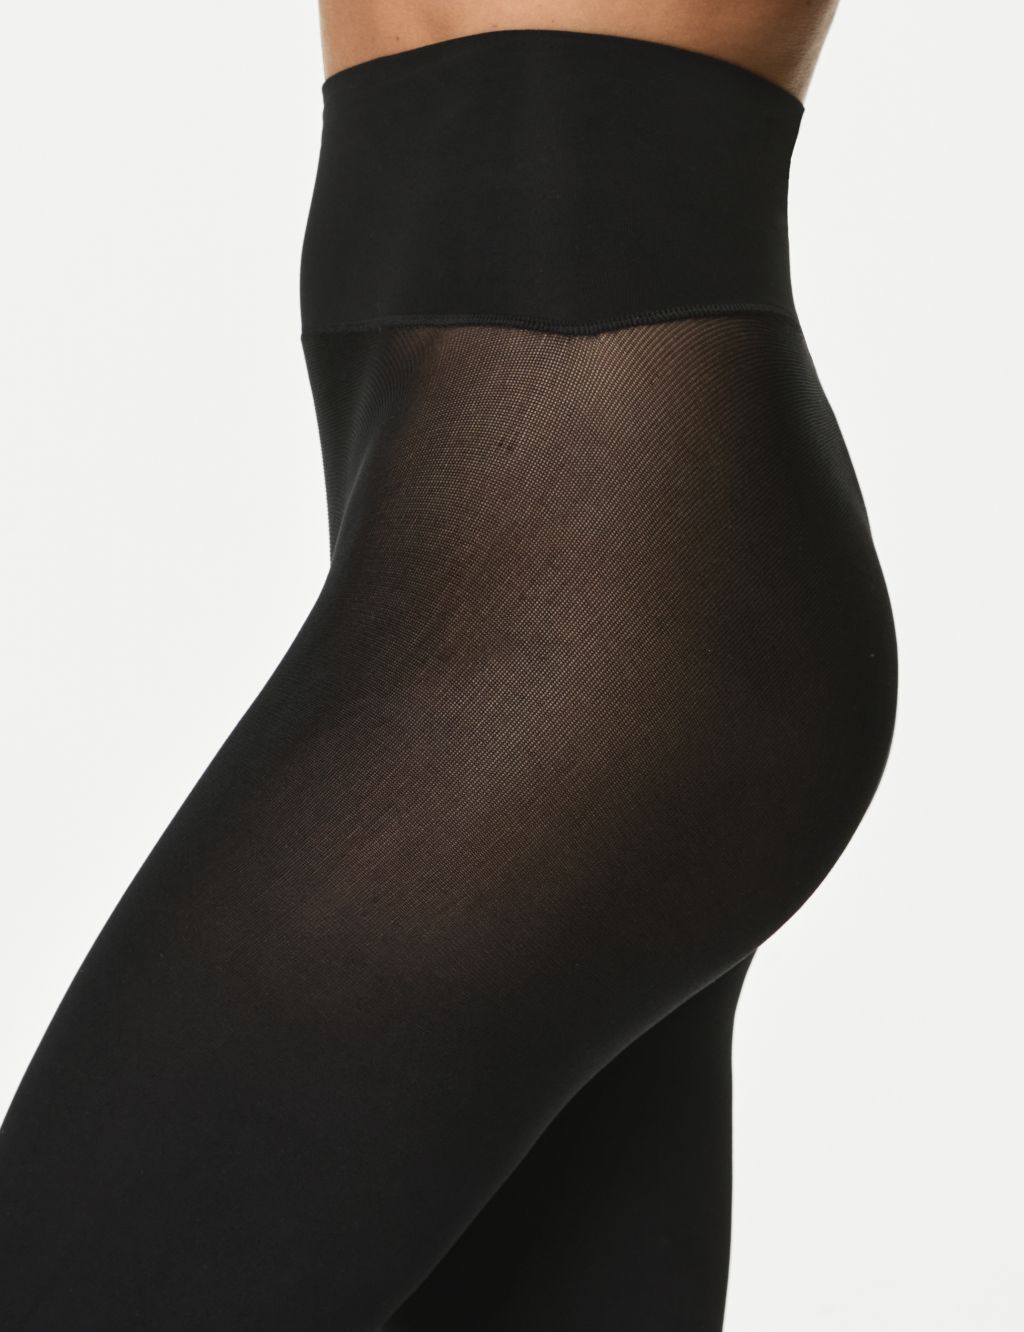 60 Denier Soft Luxe Seamless Opaque Tights image 3